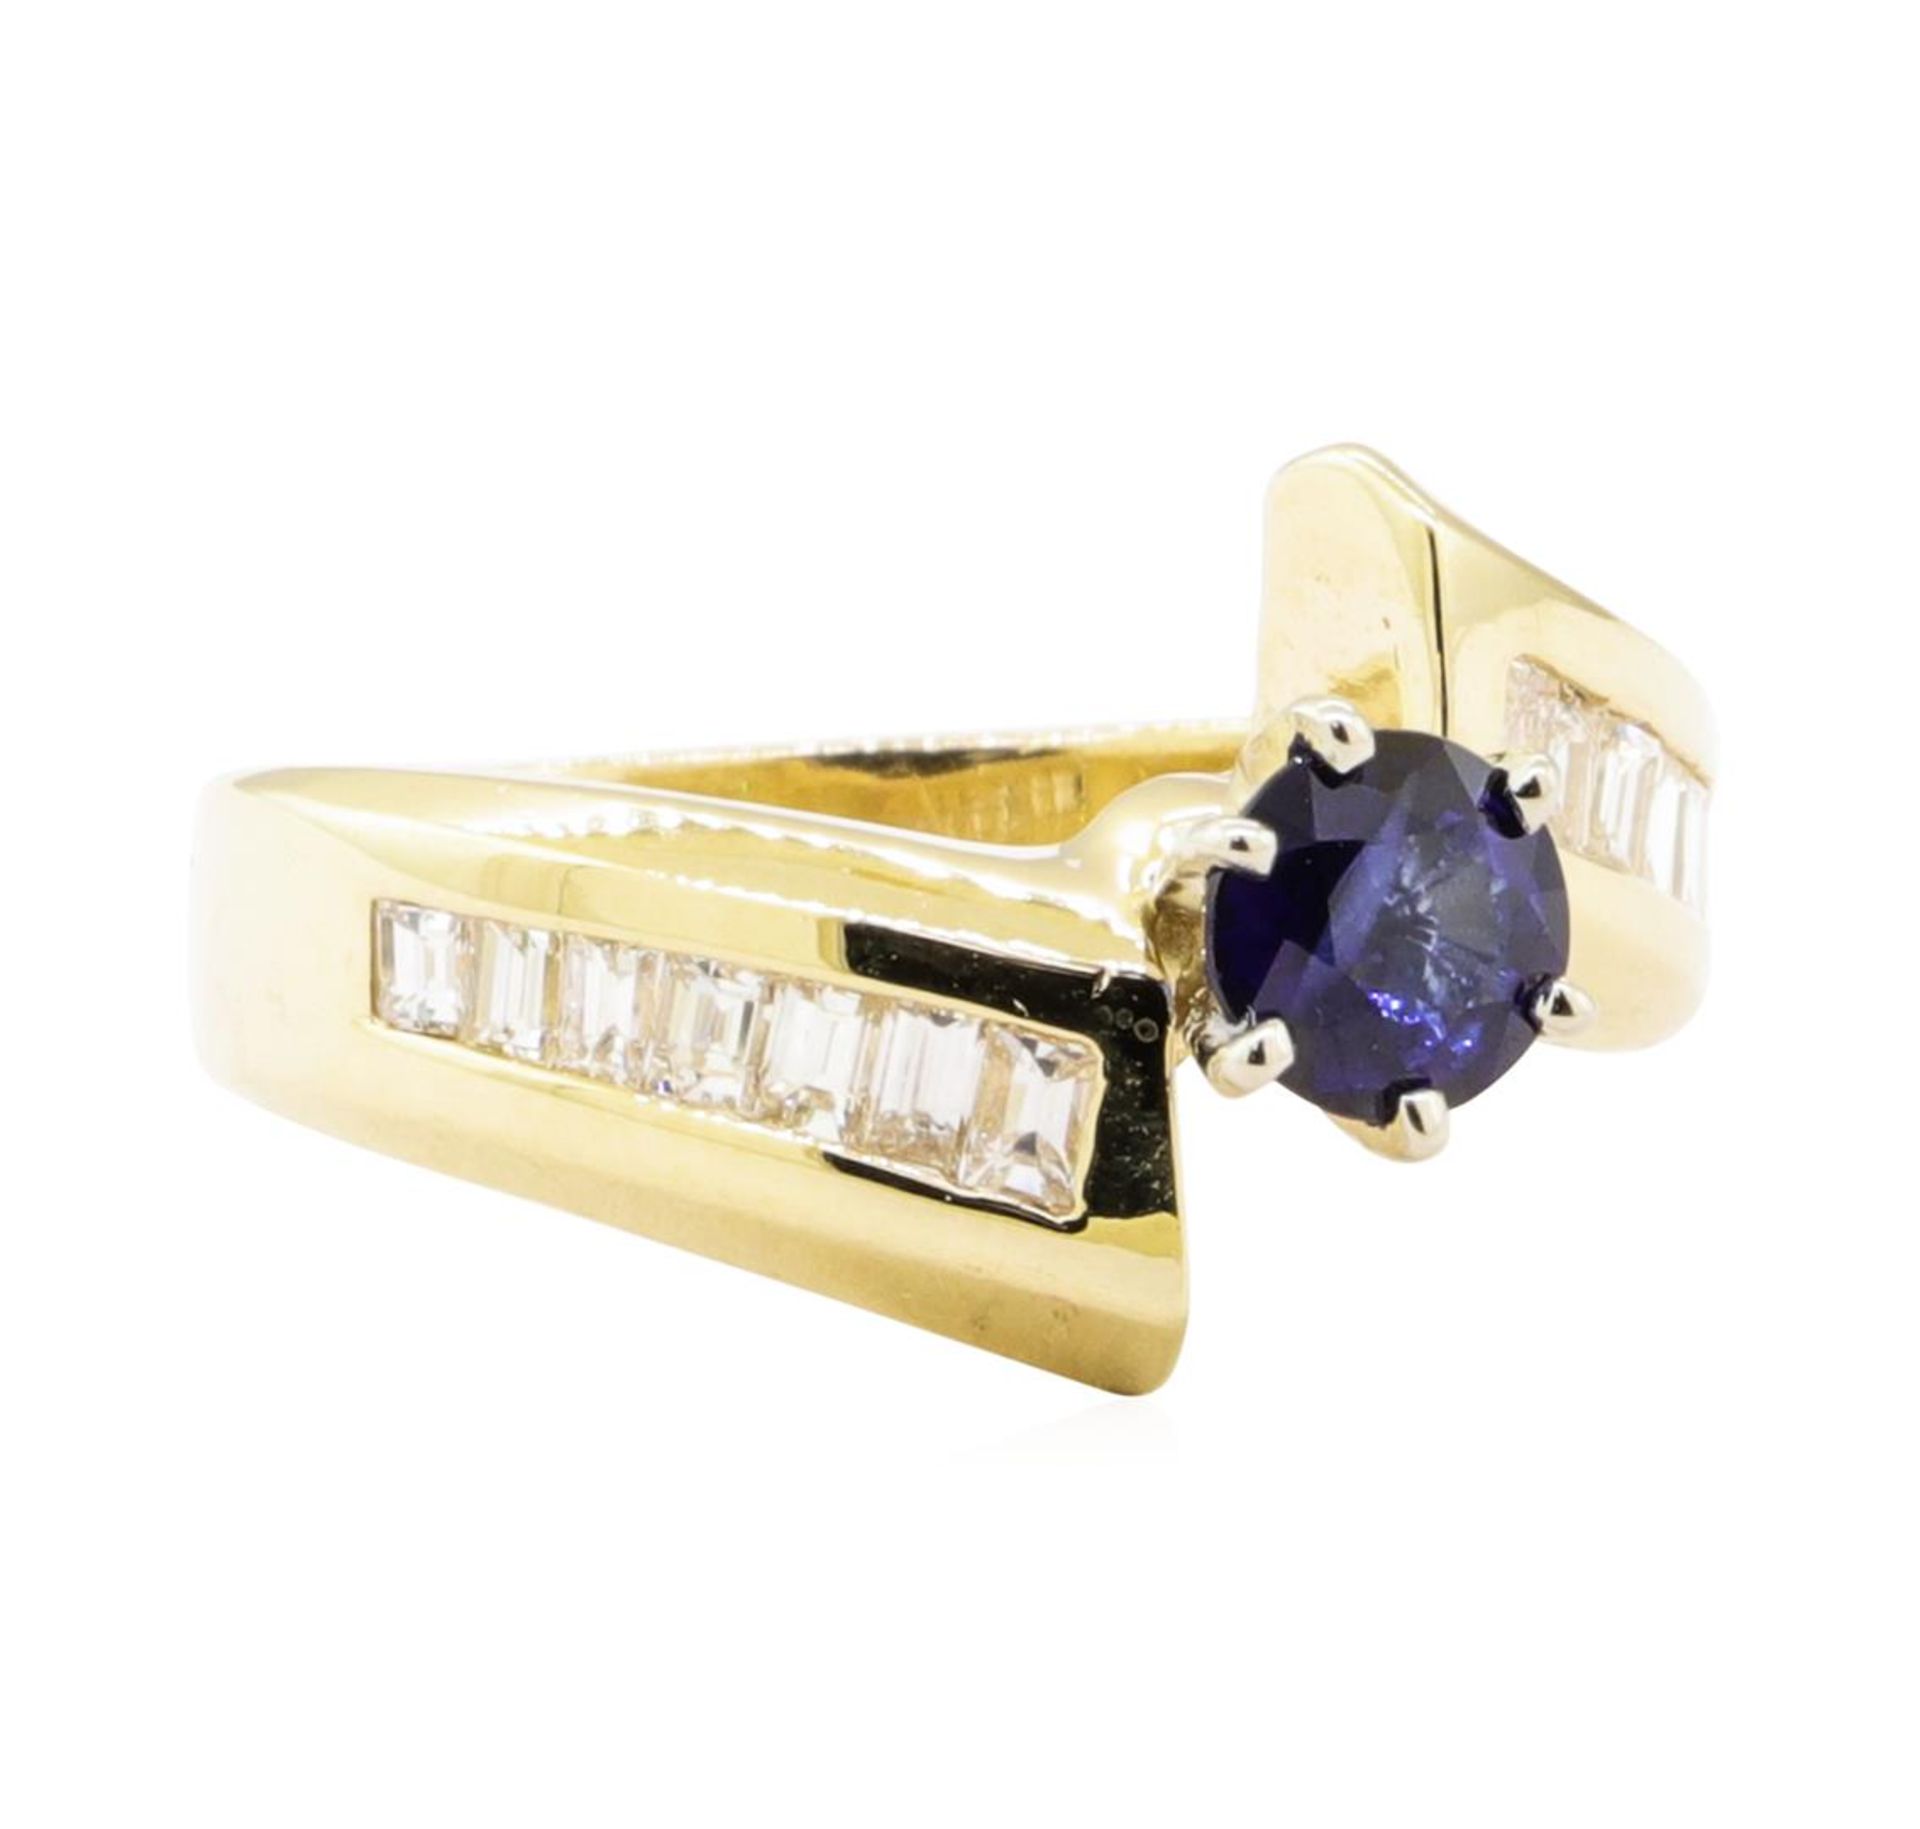 1.31ctw Blue Sapphire and Diamond Ring - 14KT Yellow Gold